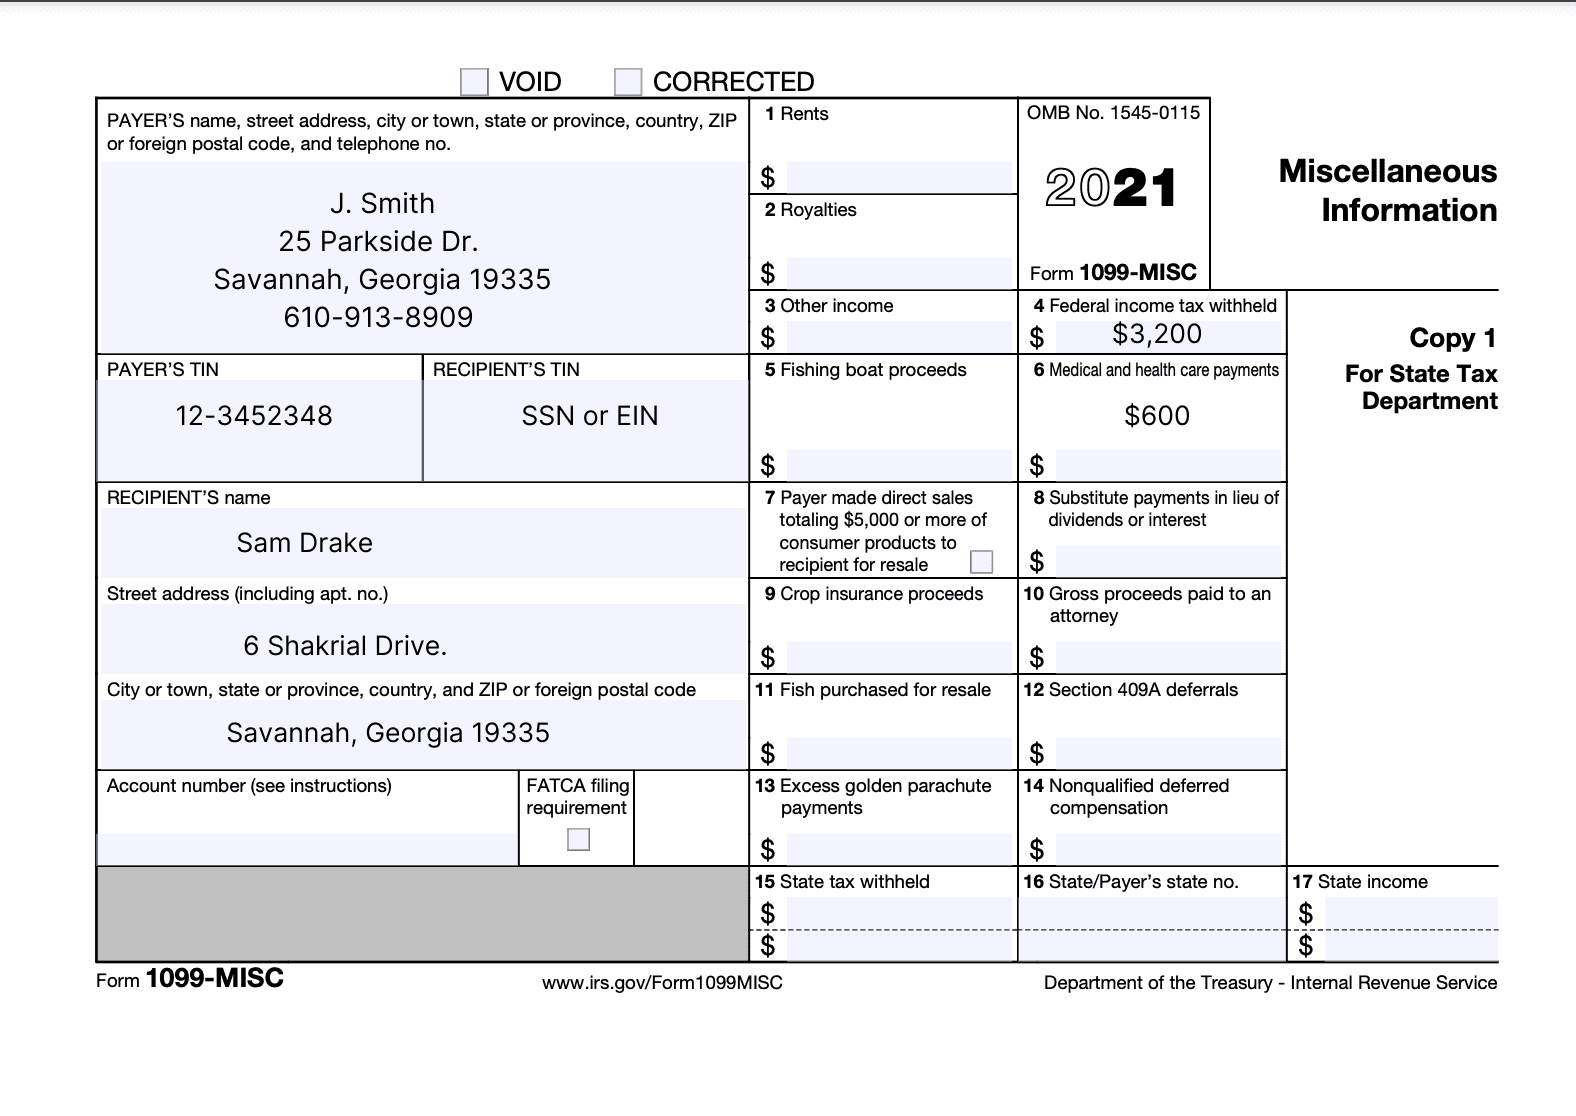 Image of a corrected Form 1099-MISC with payer and recipient information, income types, tax withholdings, and state tax department details. Relevant for self-employed, freelancers, and taxes.